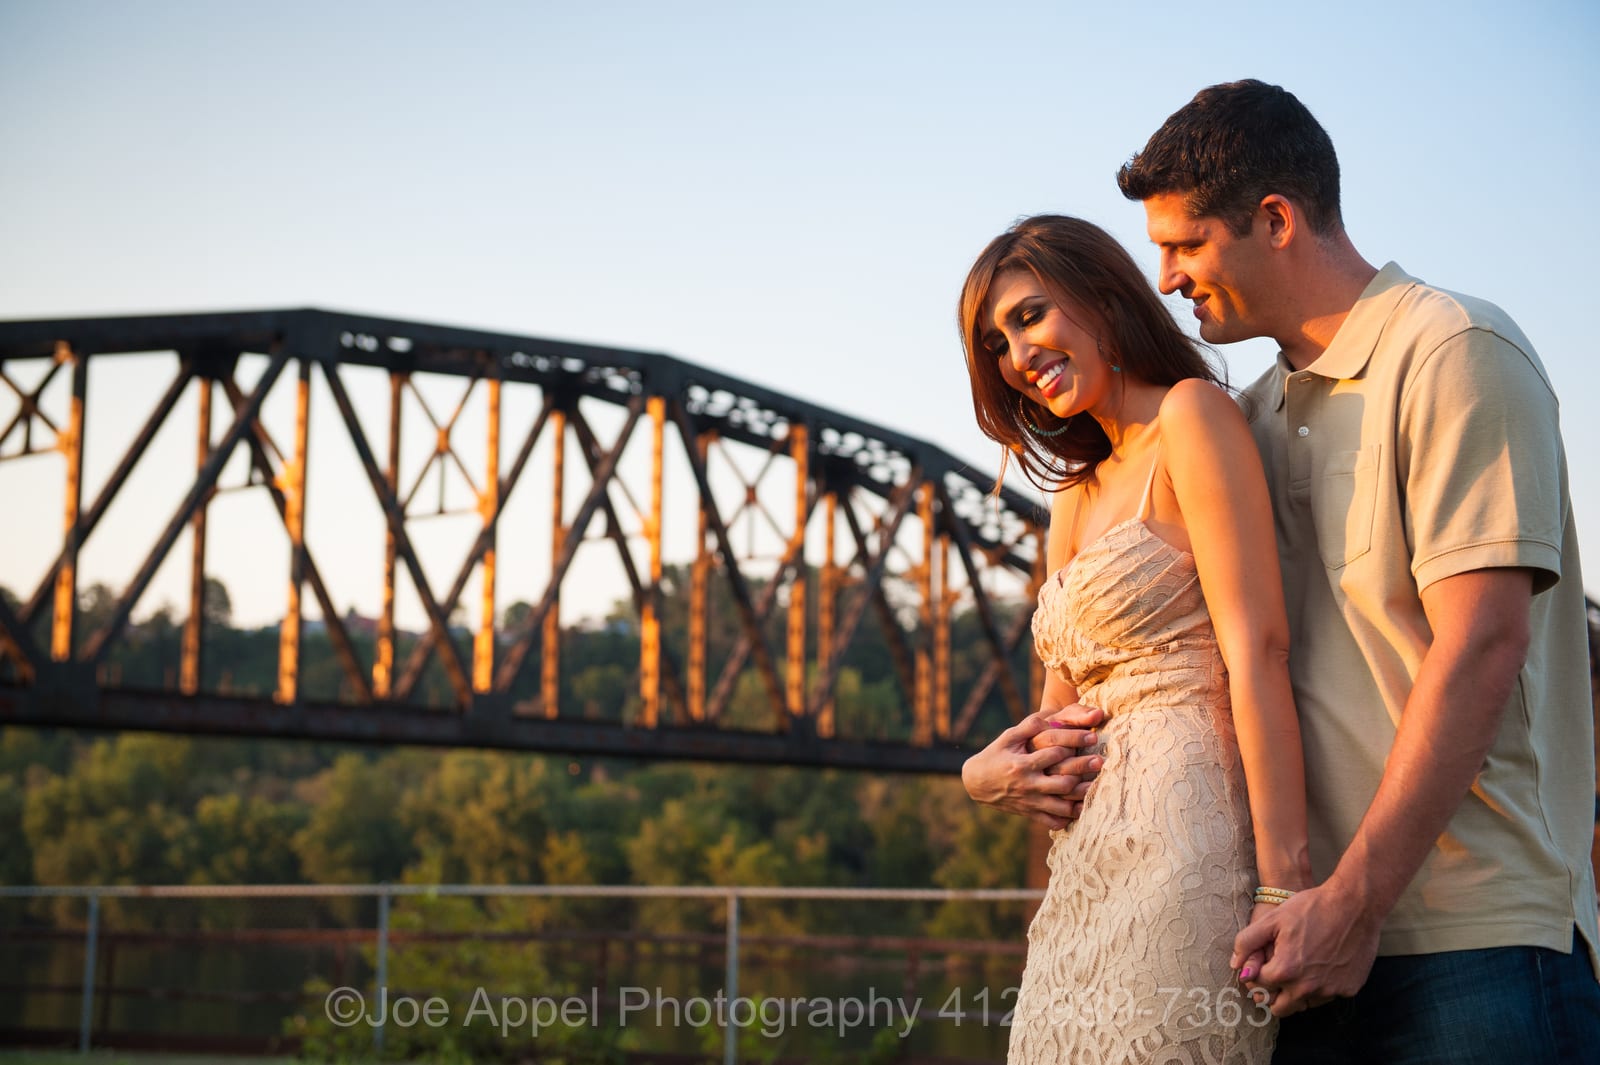 A man stands behind a woman and embraces her with an old steel bridge in the background during their Pump House Engagement Photography session.